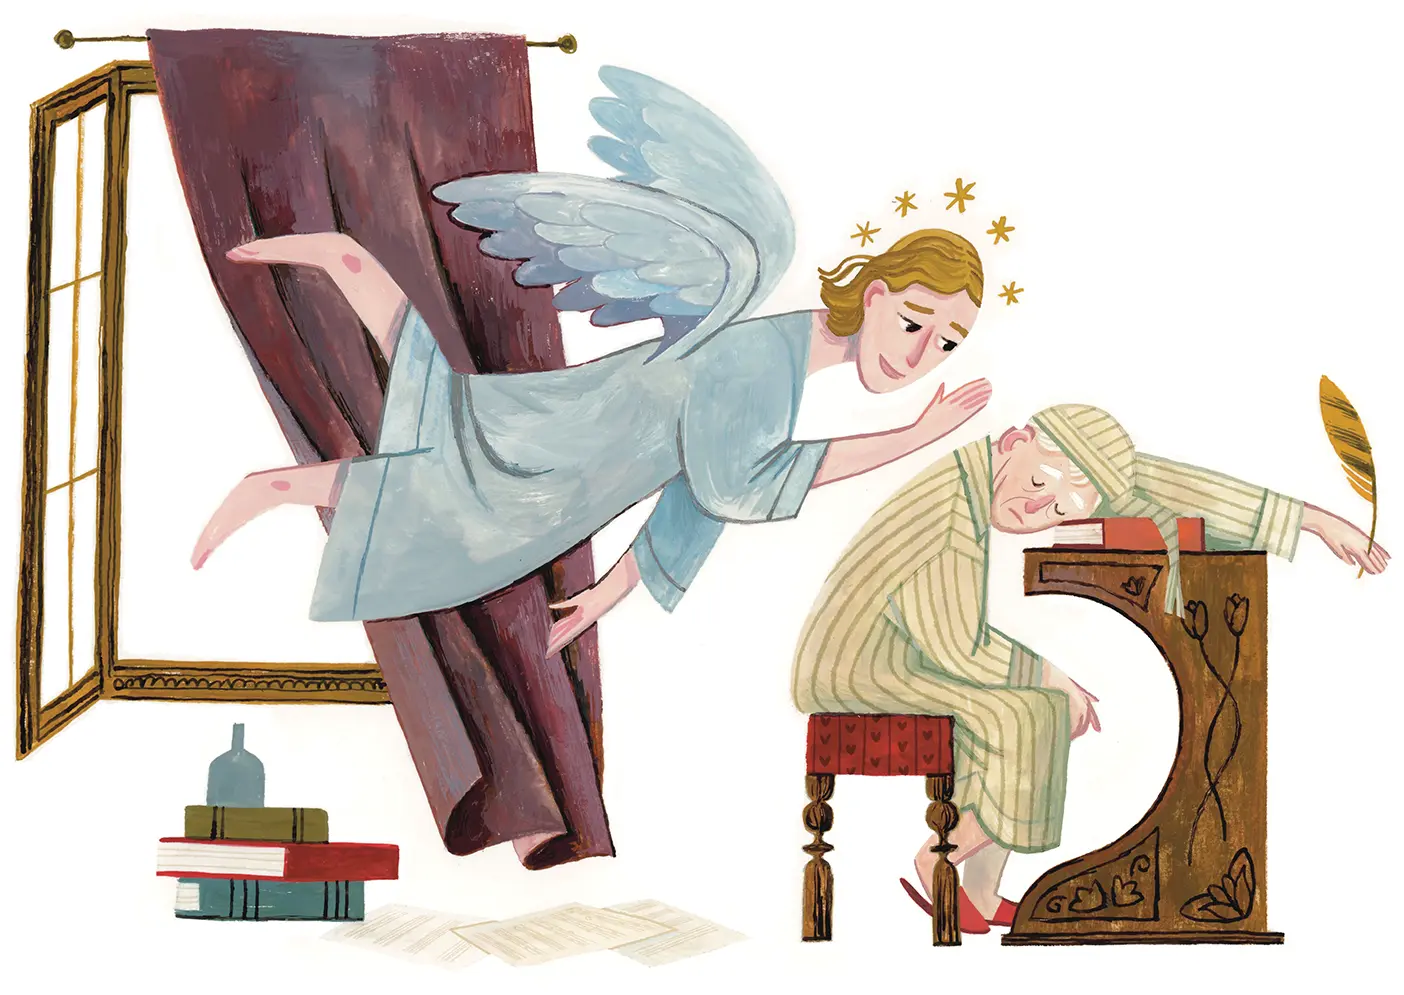 An angel taps on the back of a sleeping man at a desk in front of an open window.